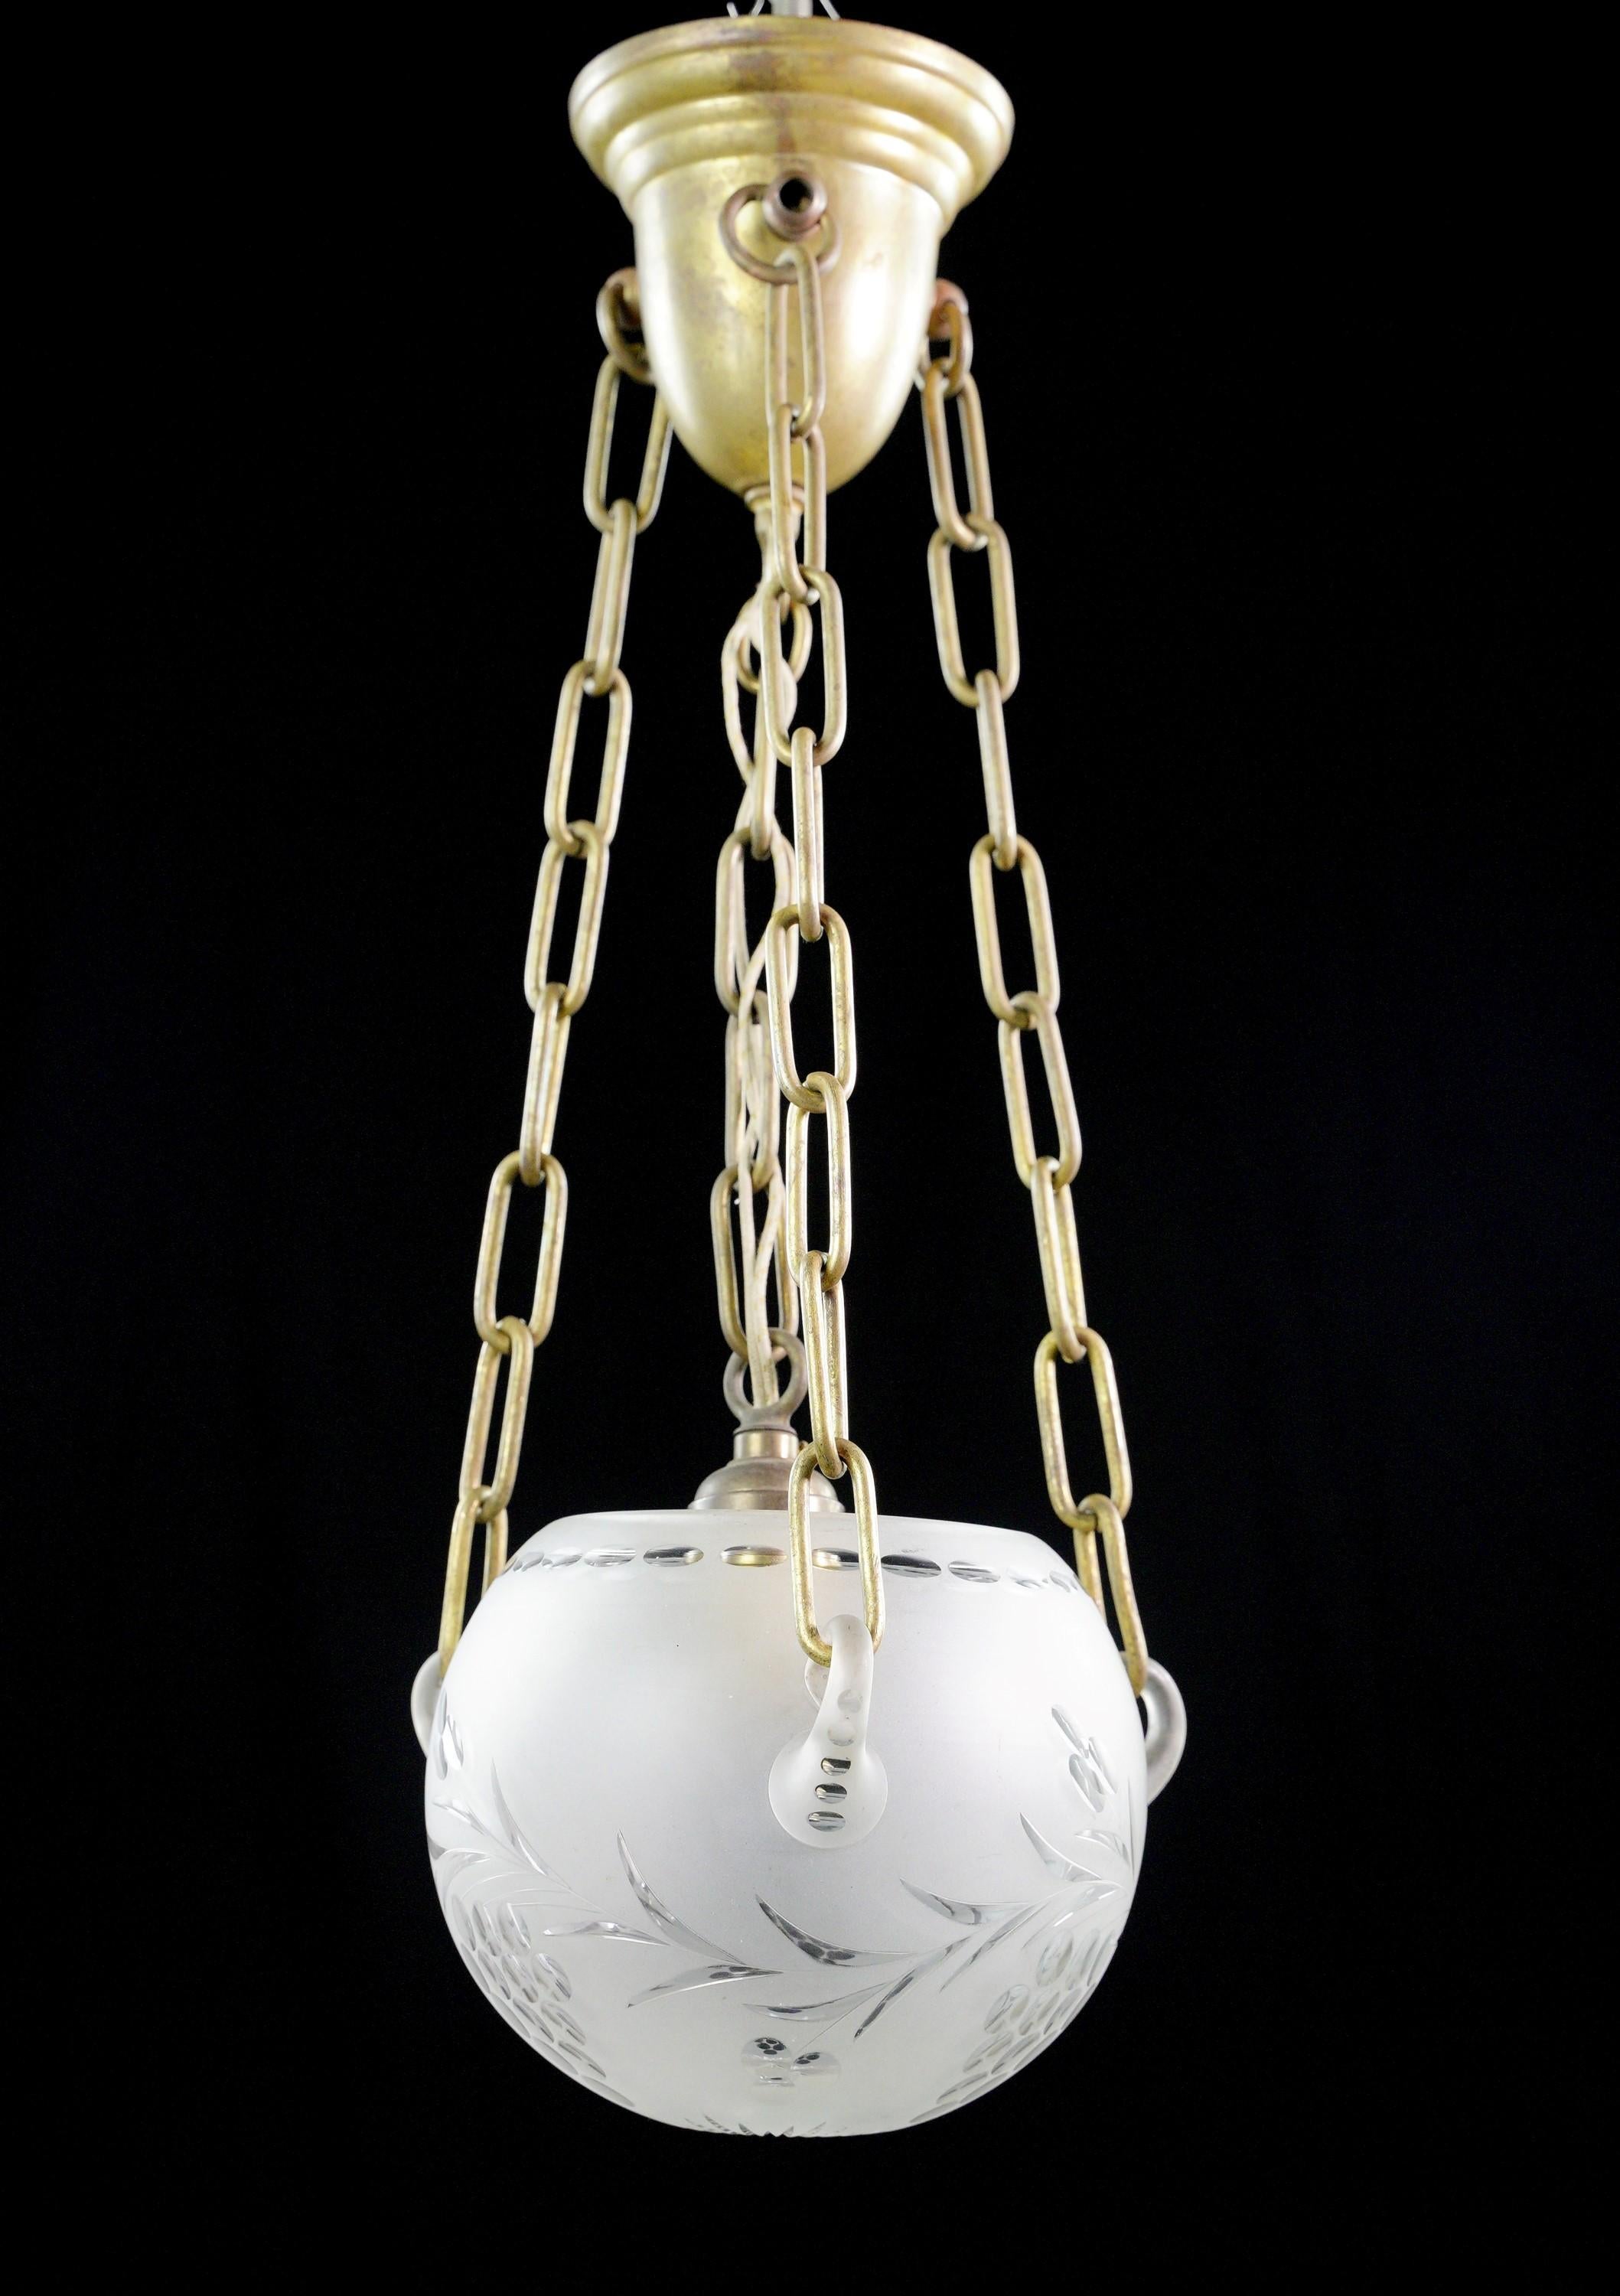 frosted glass pendant light